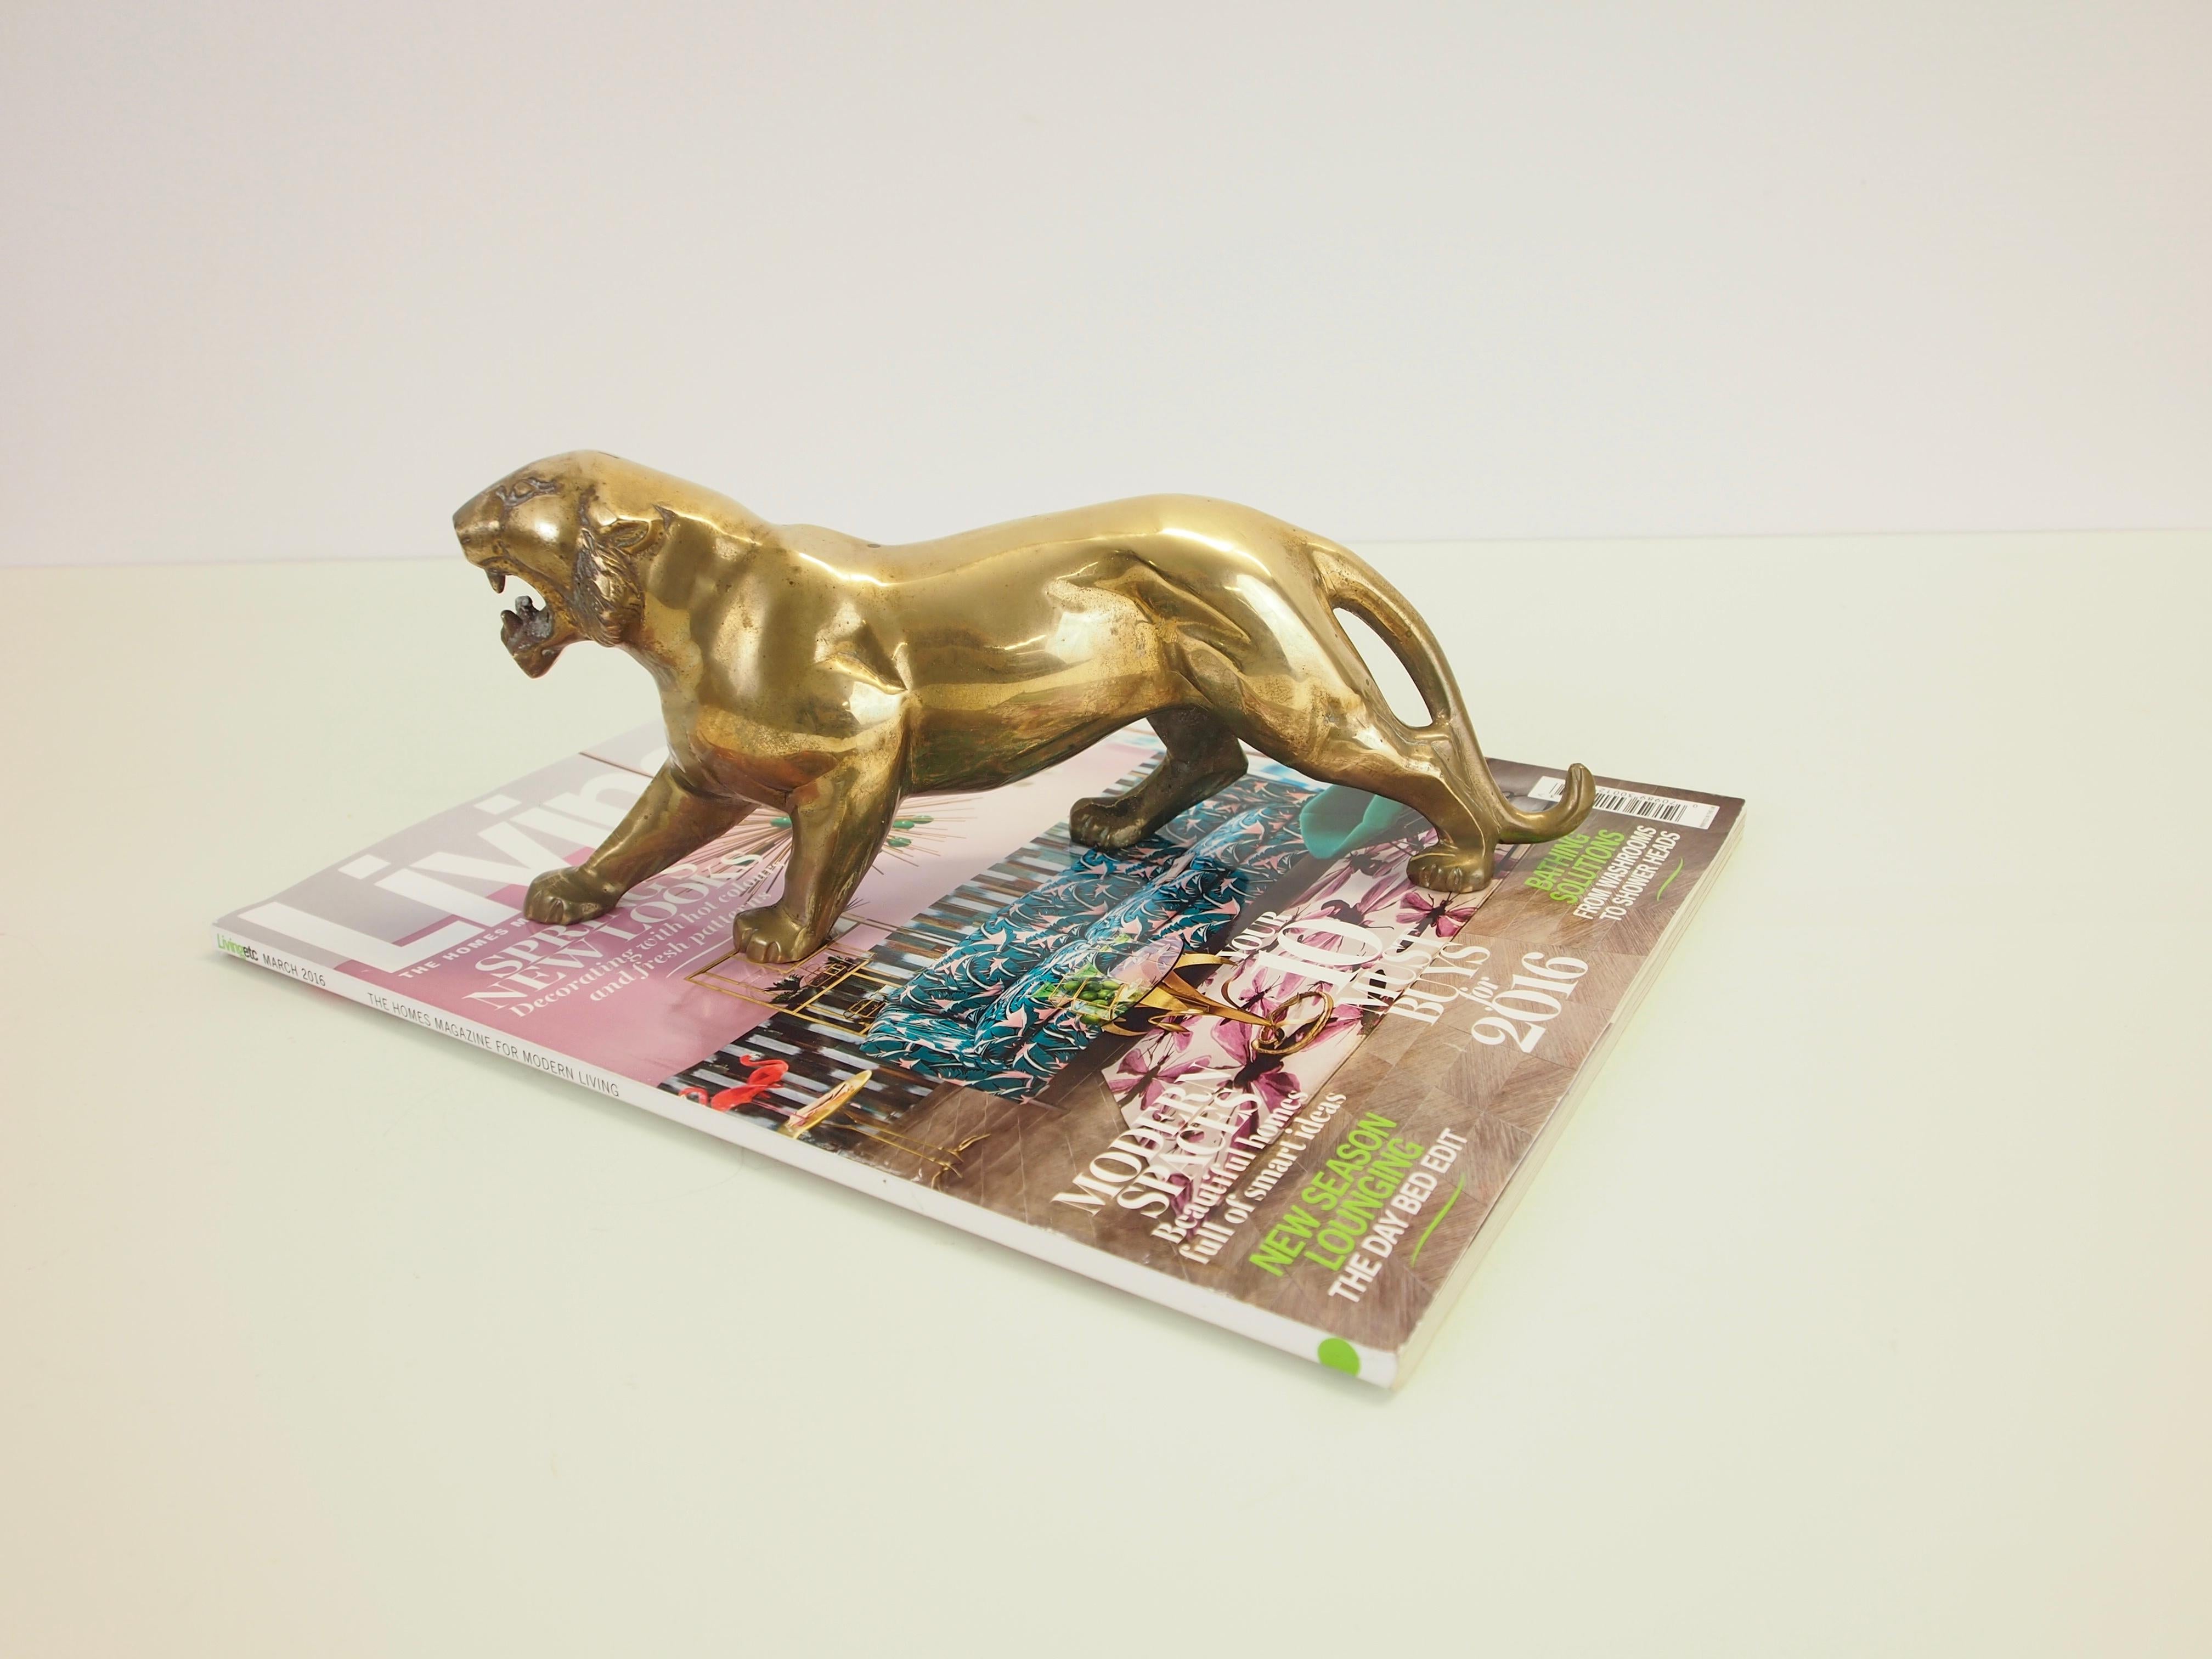 Brass vintage midcentury presse papier or tiger figurine (sculpture) in Hollywood Regency or chinoiserie Chique style.

In good vintage condition.

Measurements are H 11 x W 24 x D 7 cm.